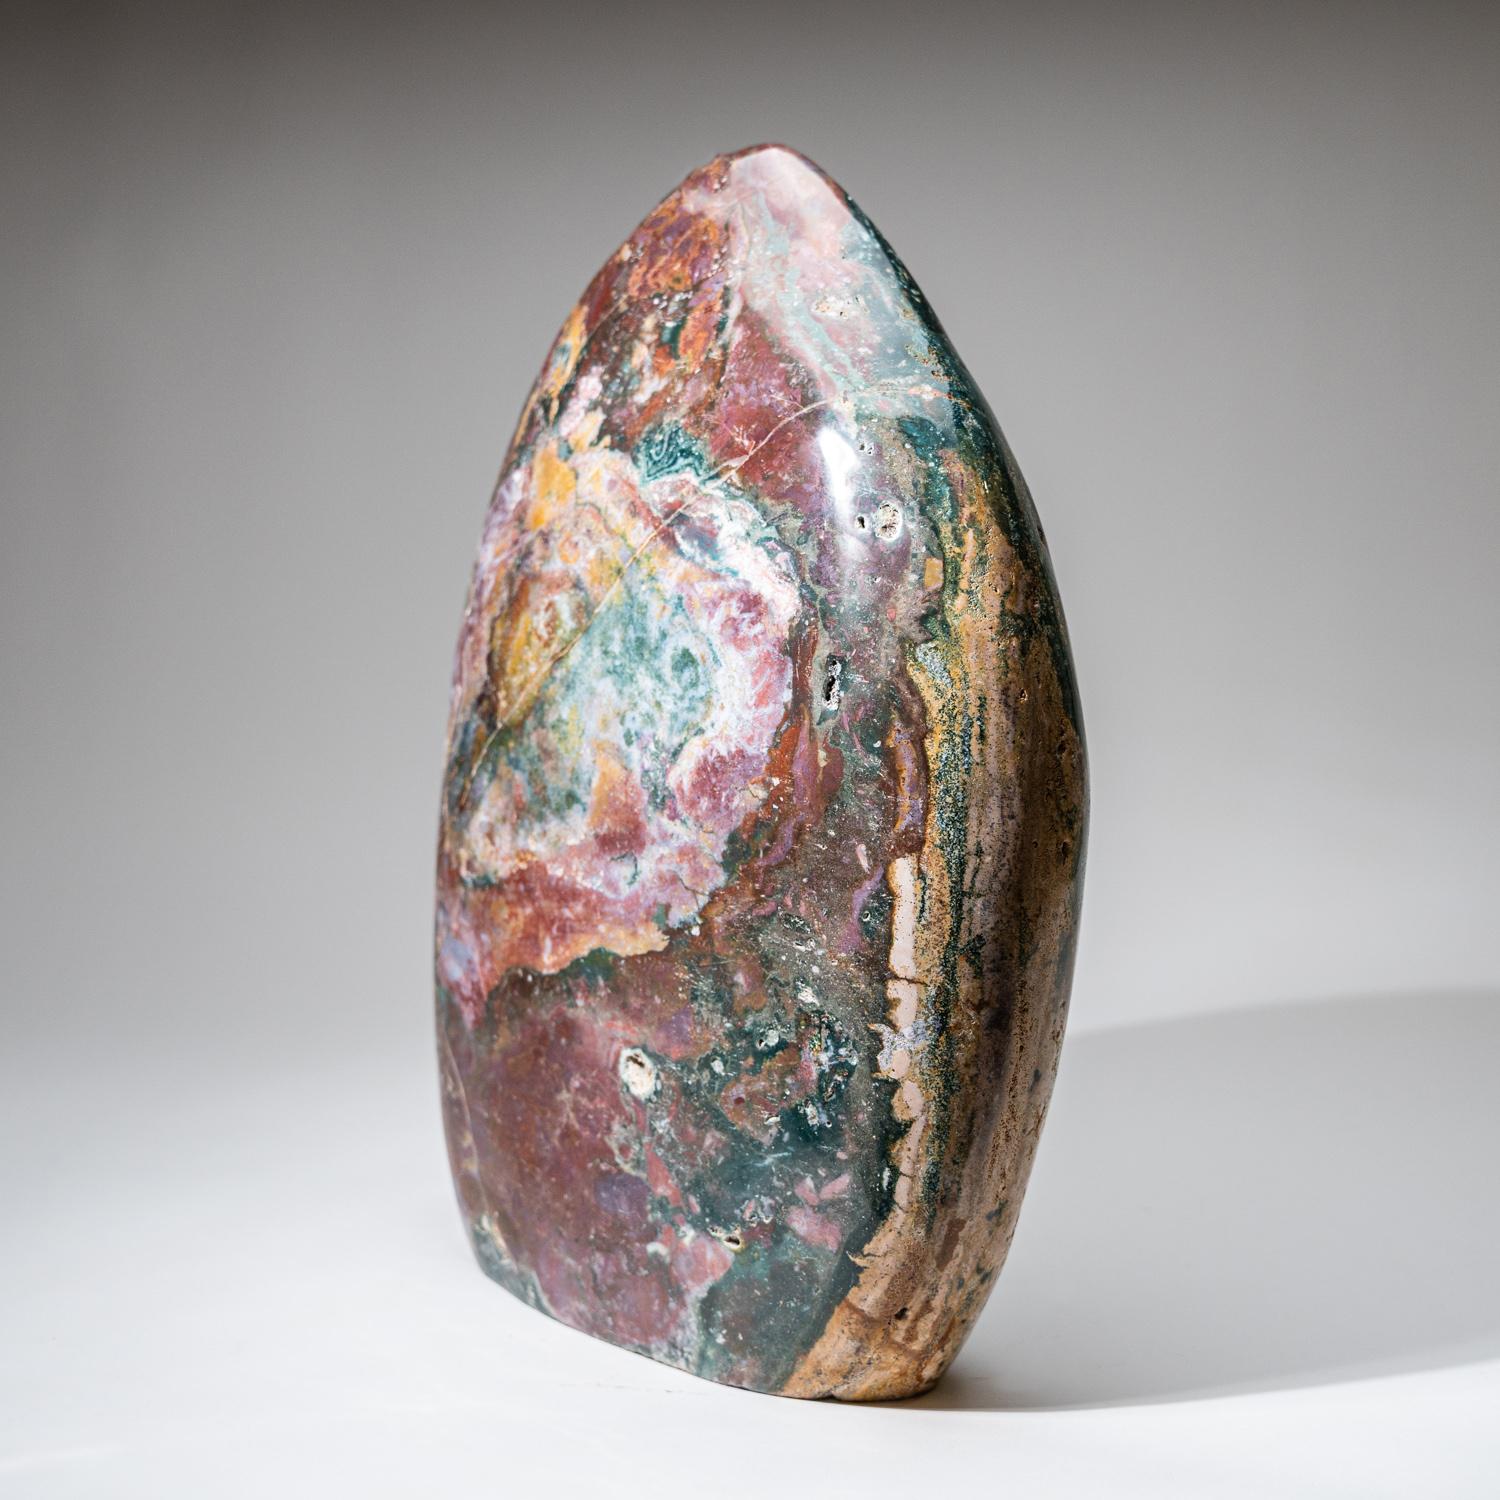 Incredible top-quality, hand-polished freeform specimen, made from a solid piece of natural Ocean Jasper. This large piece has an amazing pattern with beautiful hues of green, red, yellow, and tan. This unique specimen is the perfect accessory for